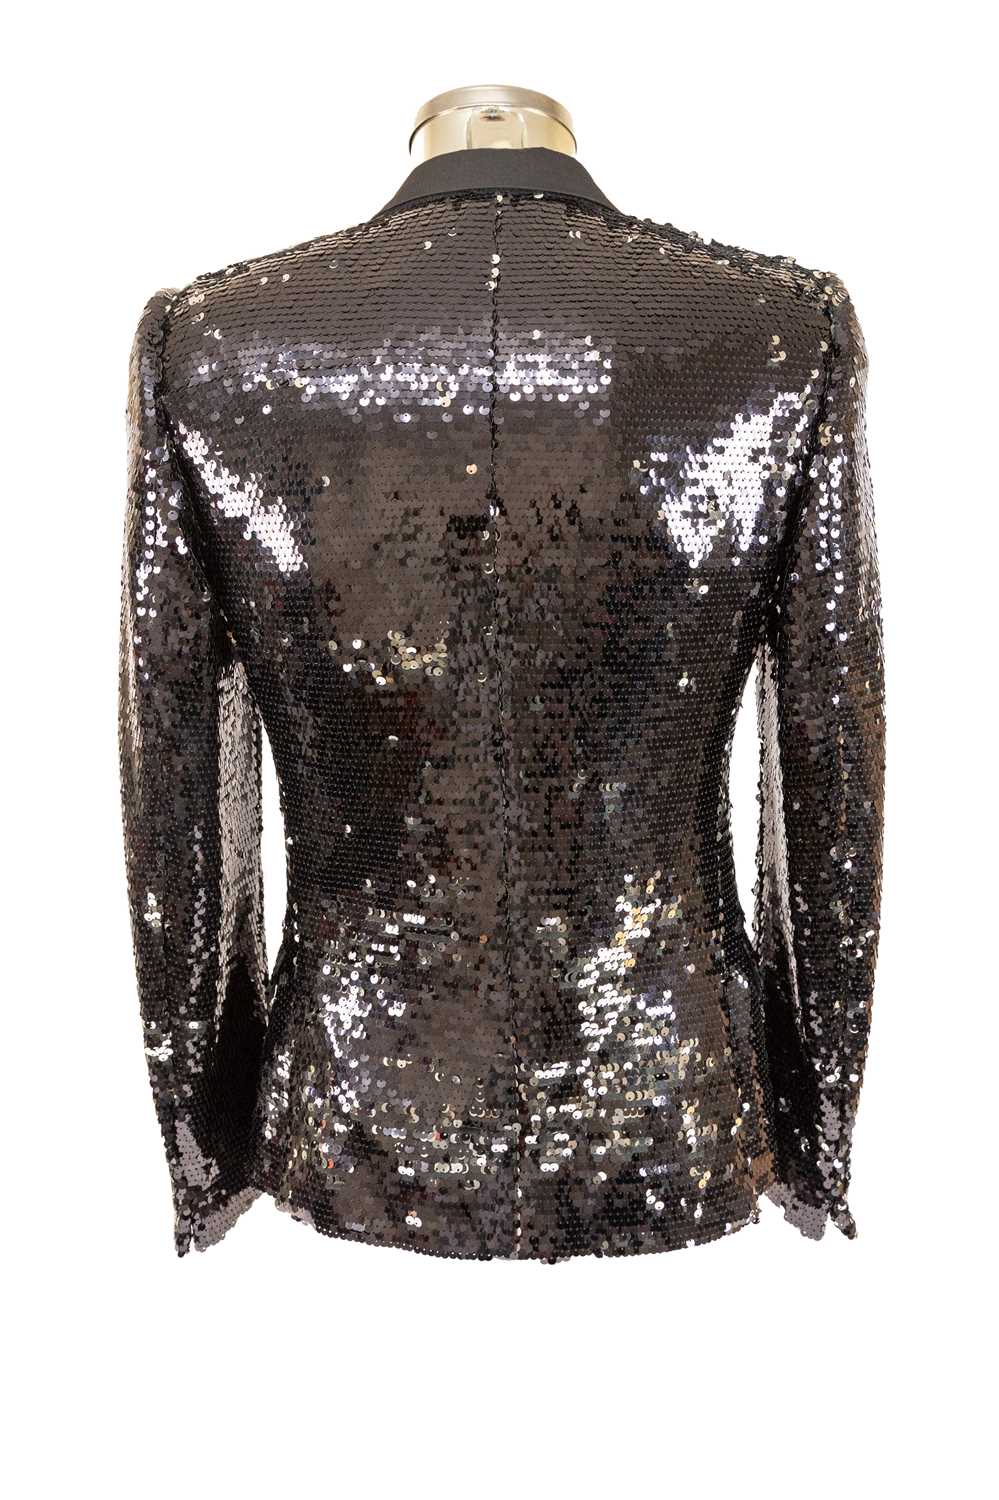 Circa 2009 Dolce & Gabbana Black/Silver Sequin Evening Jacket with single-button fastening, - Image 3 of 4